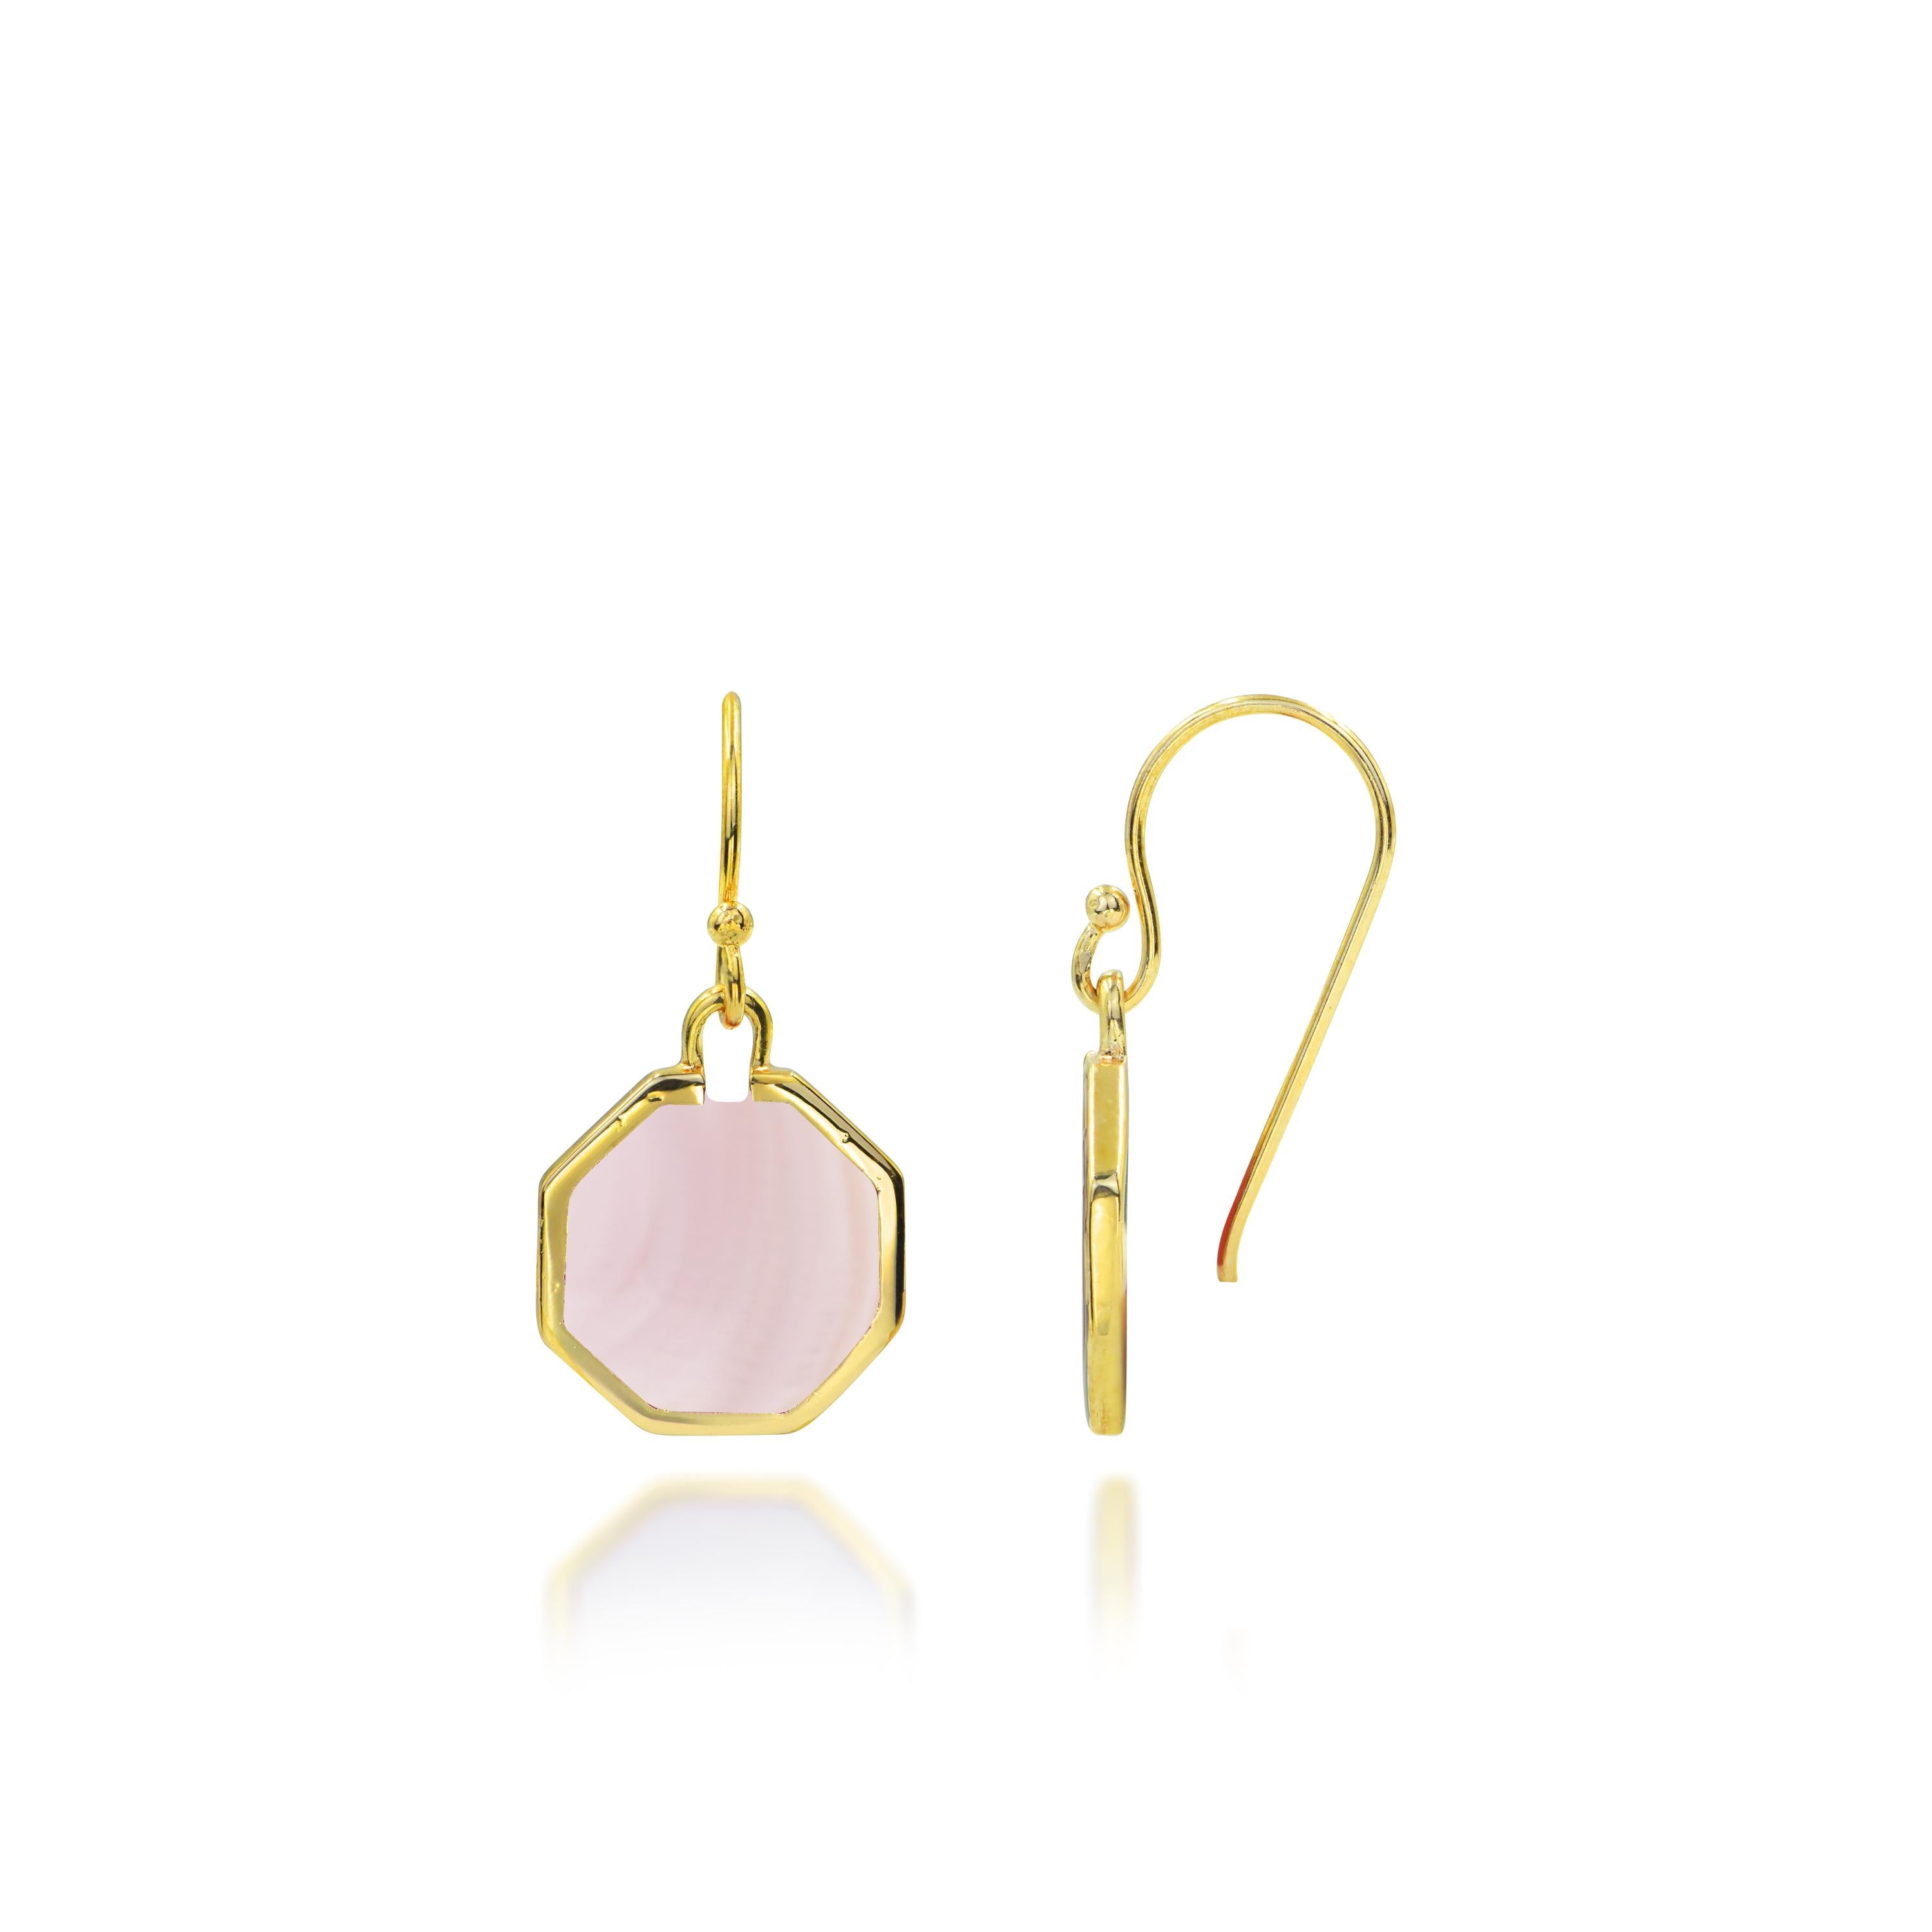 18k Gold filled Geometric Dangle earrings with MOP Abalone Pink Shell Black Onyx For Sale 1